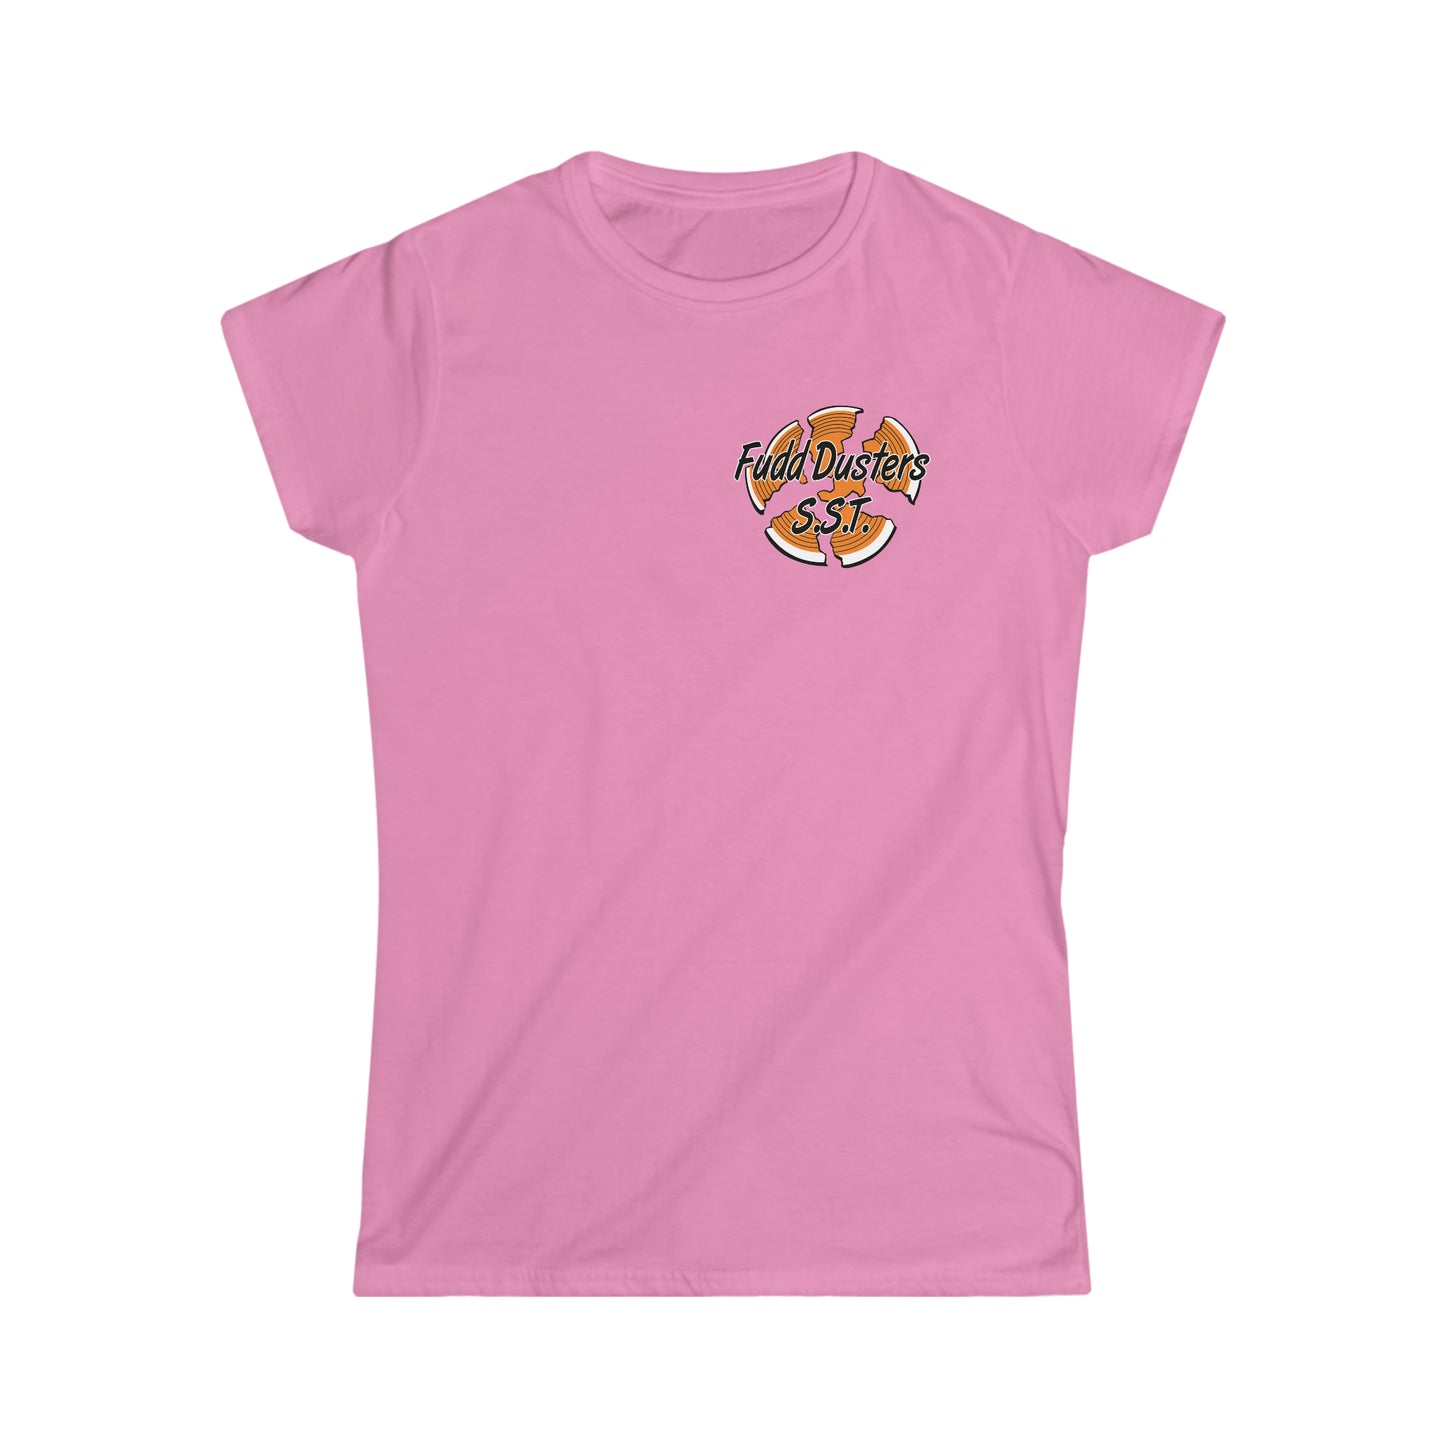 2 Sided Women's Softstyle Tee